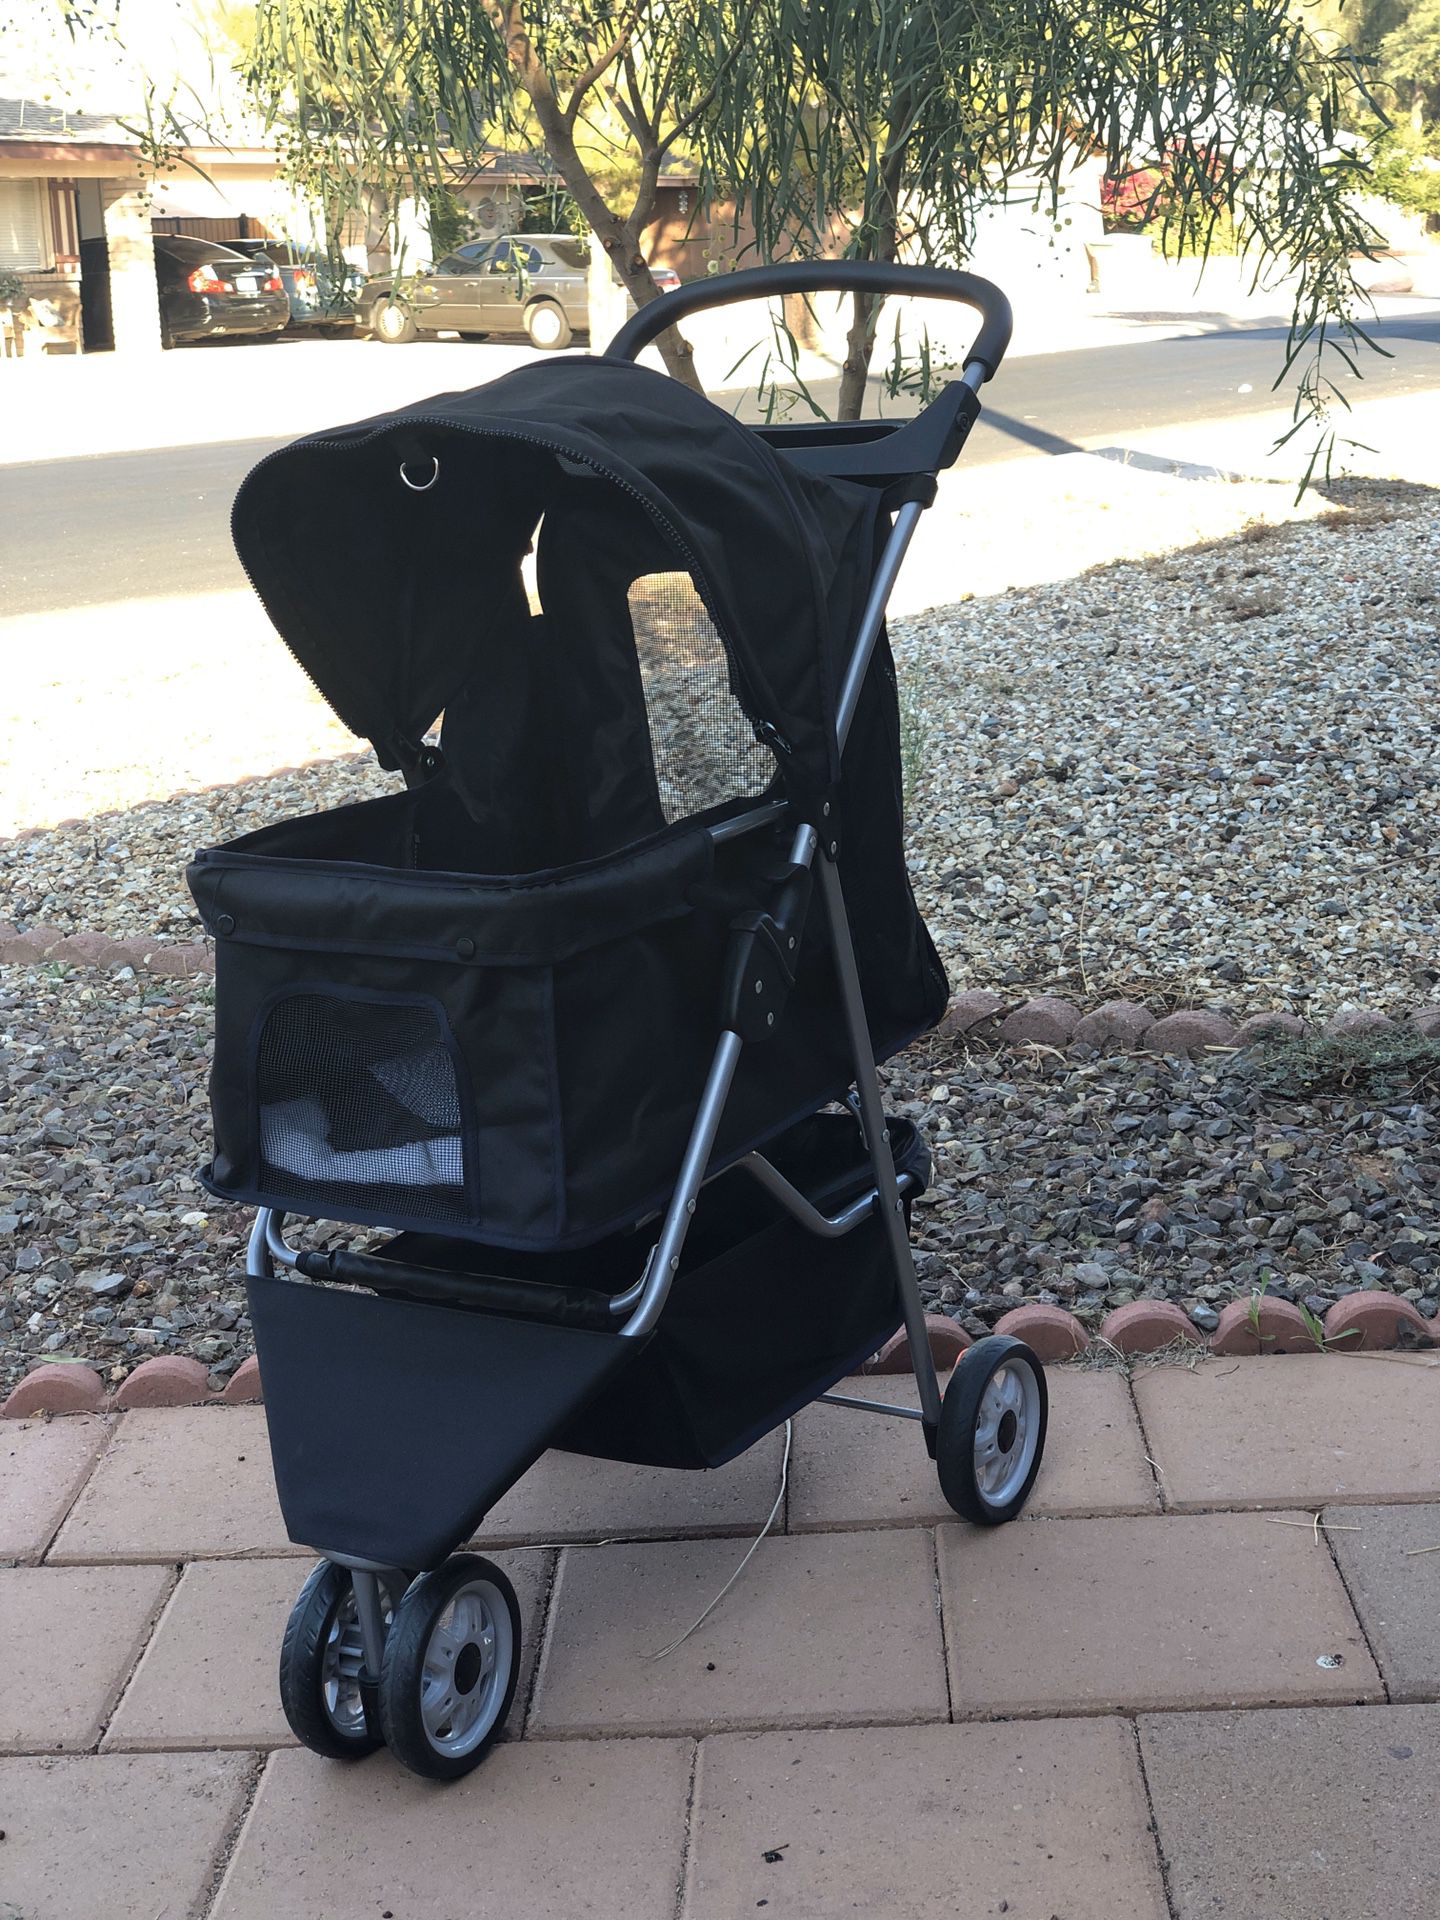 Pet stroller for small to medium size dogs or cats